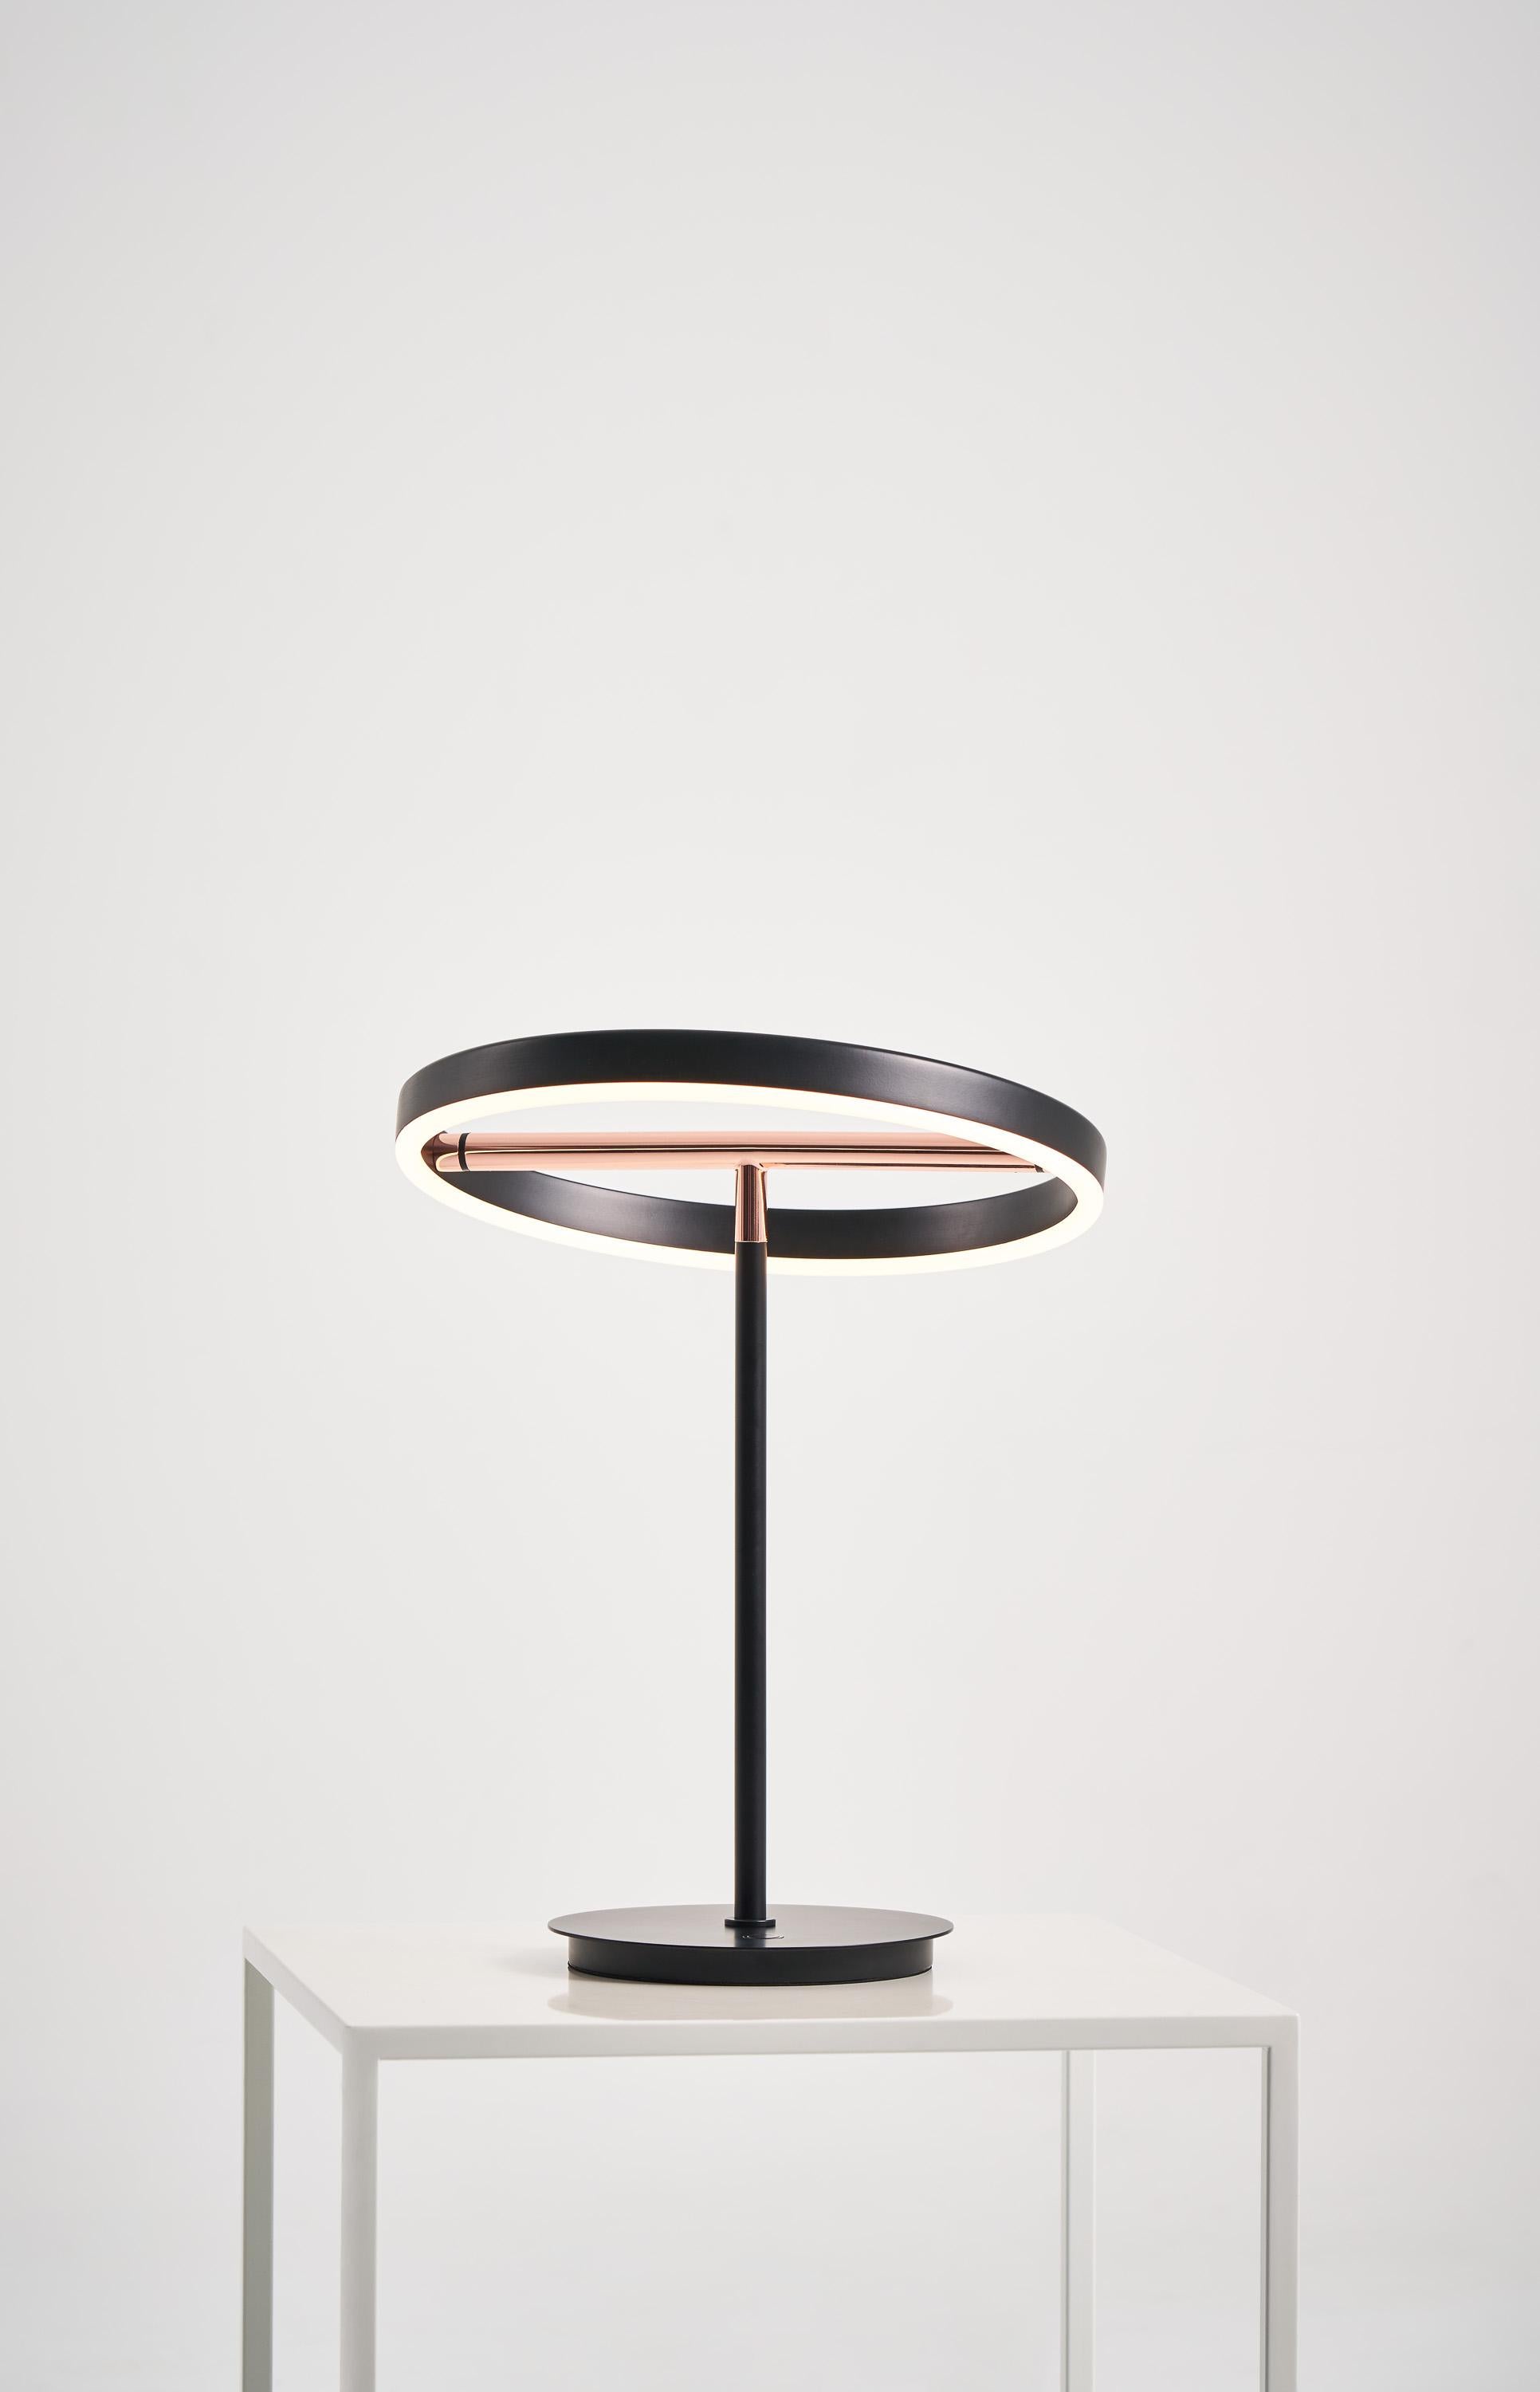 SOL collection is low-key design with elaborate consideration, consists of pendant, table lamp and even bow lamp type. SOL Table Lamp ’s ring-like lampshade is finely affixed to a metallic luster balance bar, demonstrating the definition of